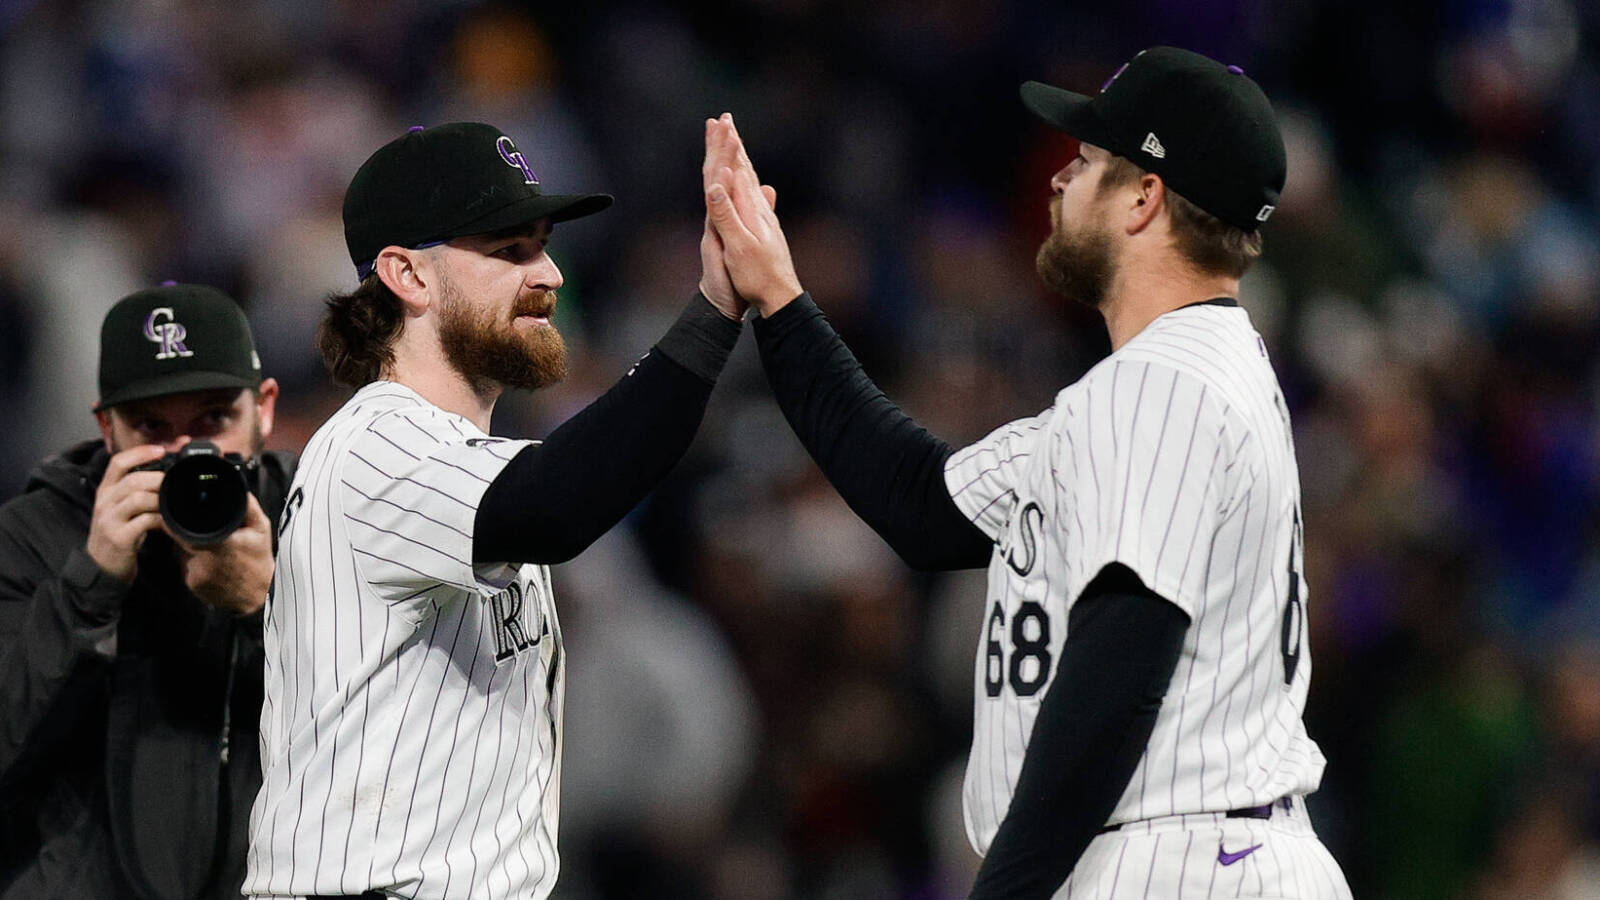 Watch: Rockies win consecutive games for the first time this season